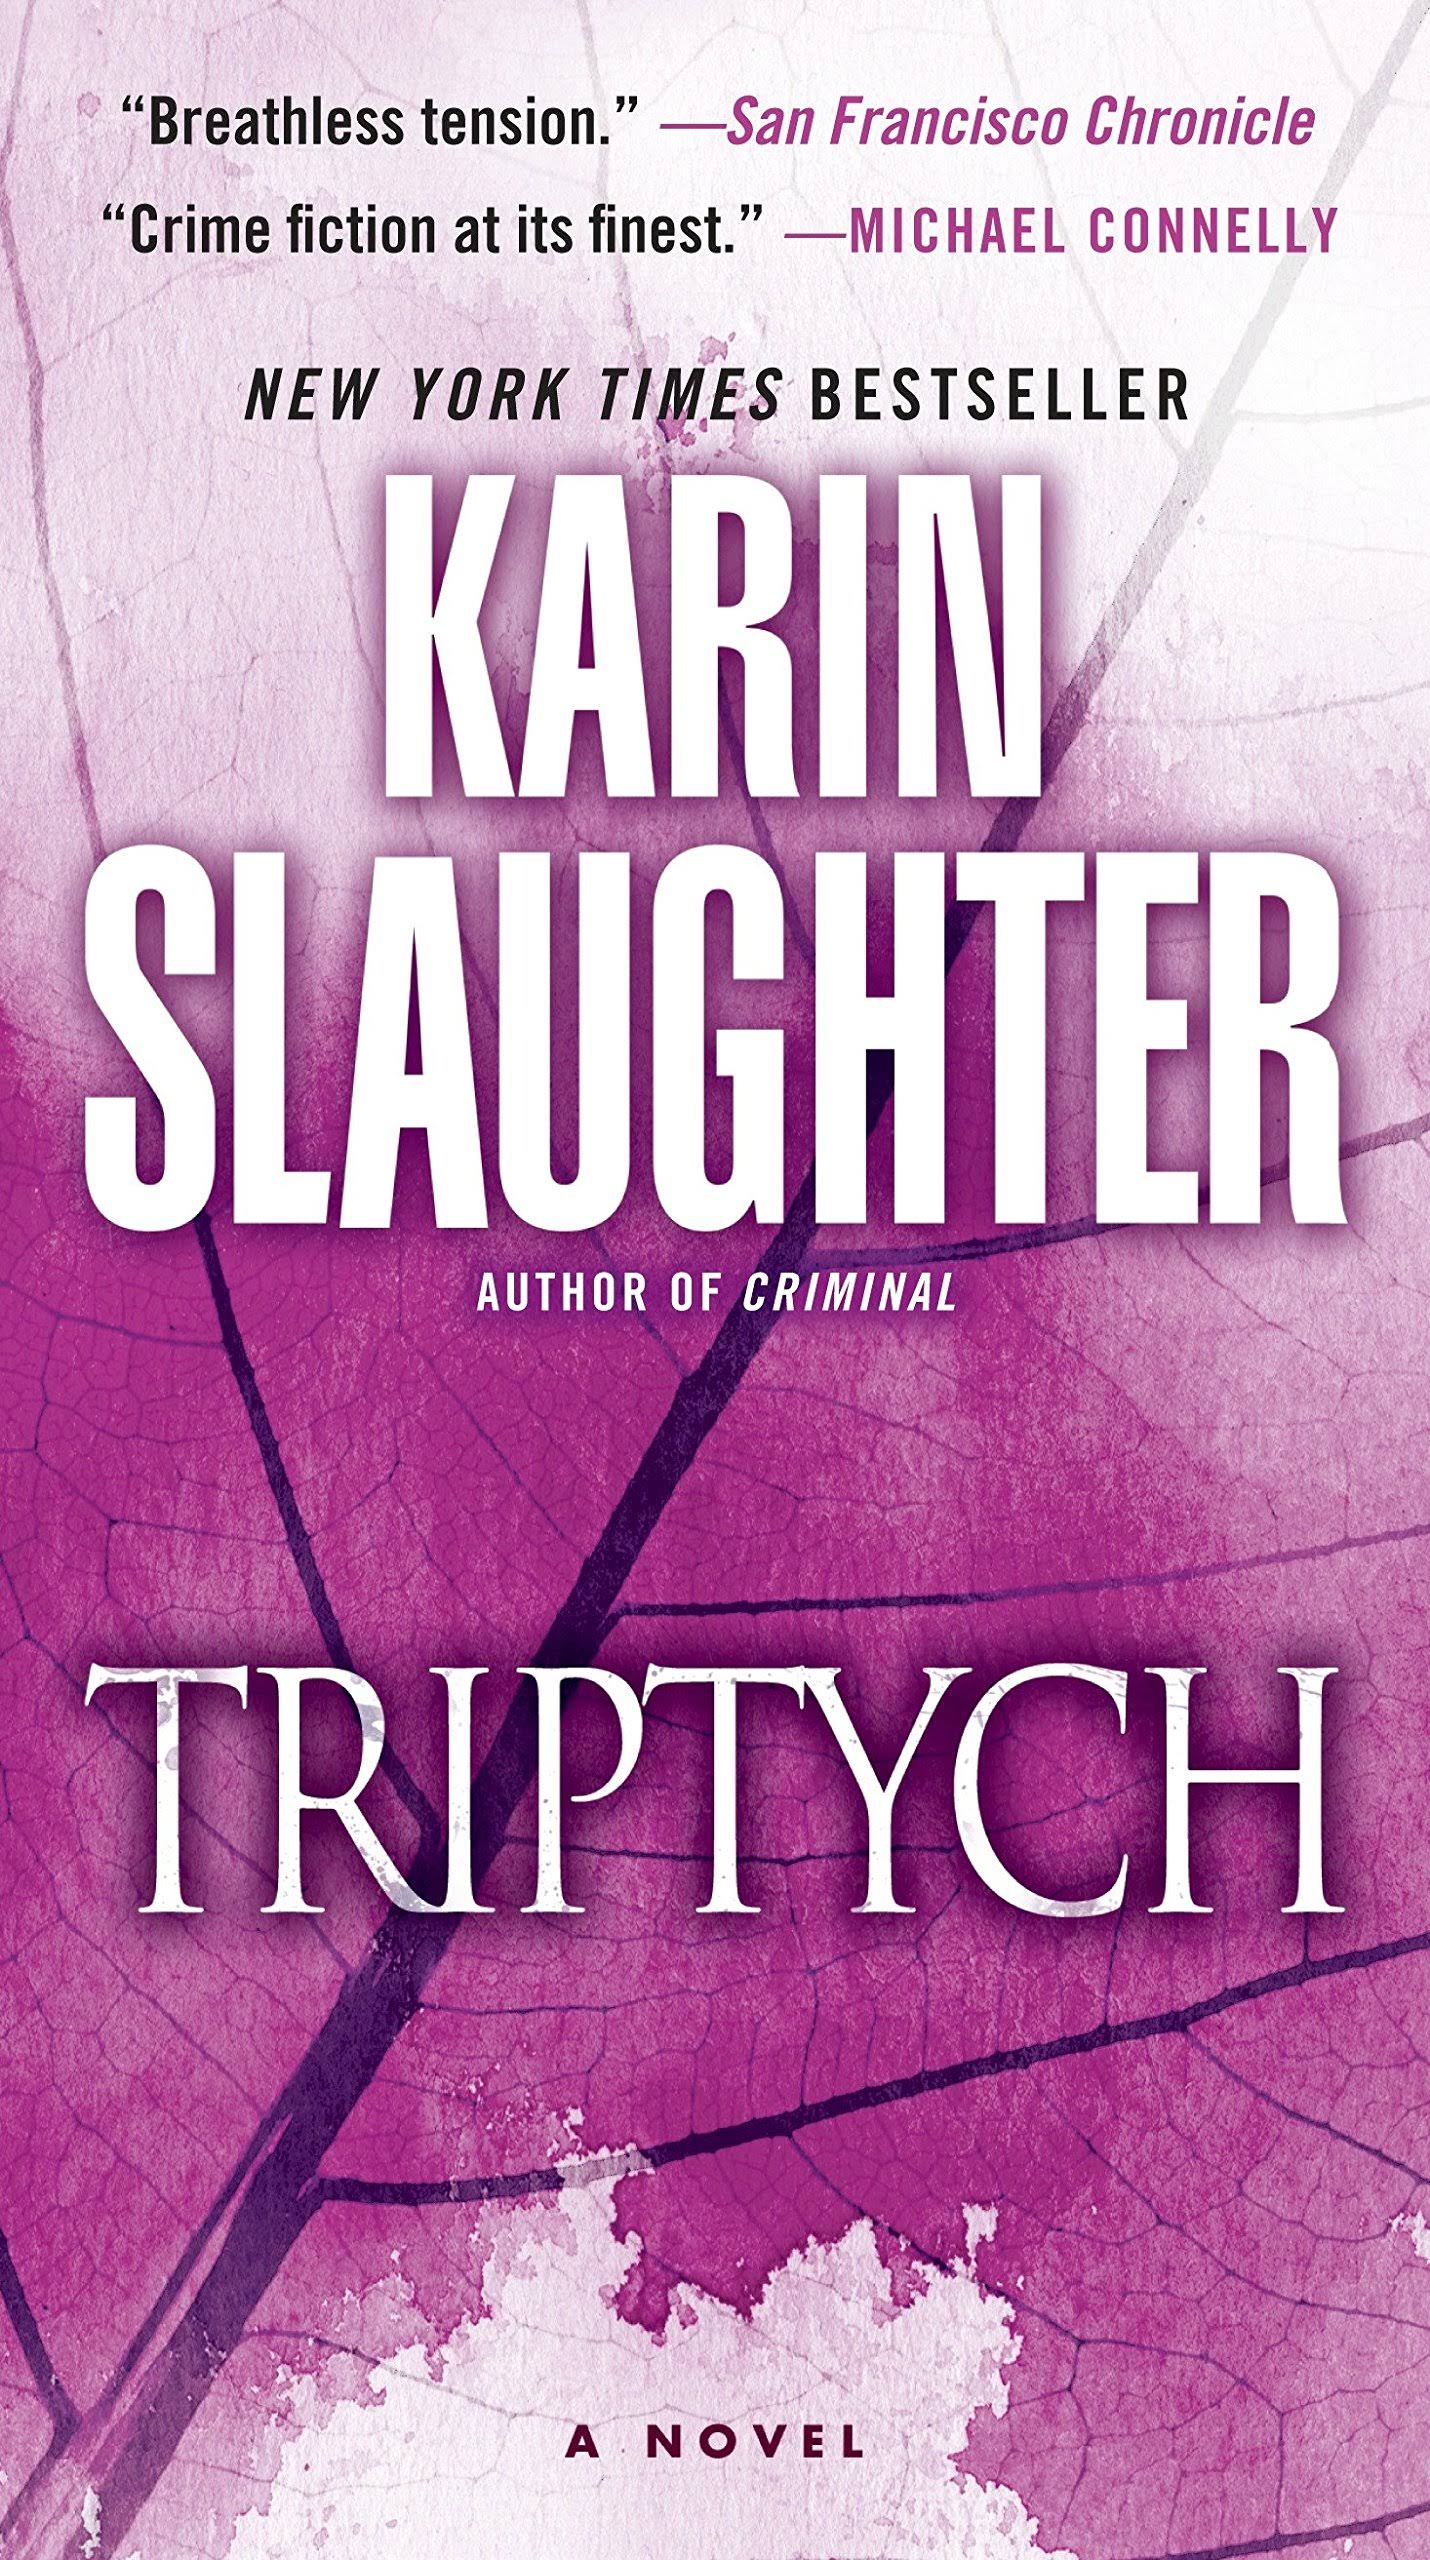 Triptych - Karin Slaughter